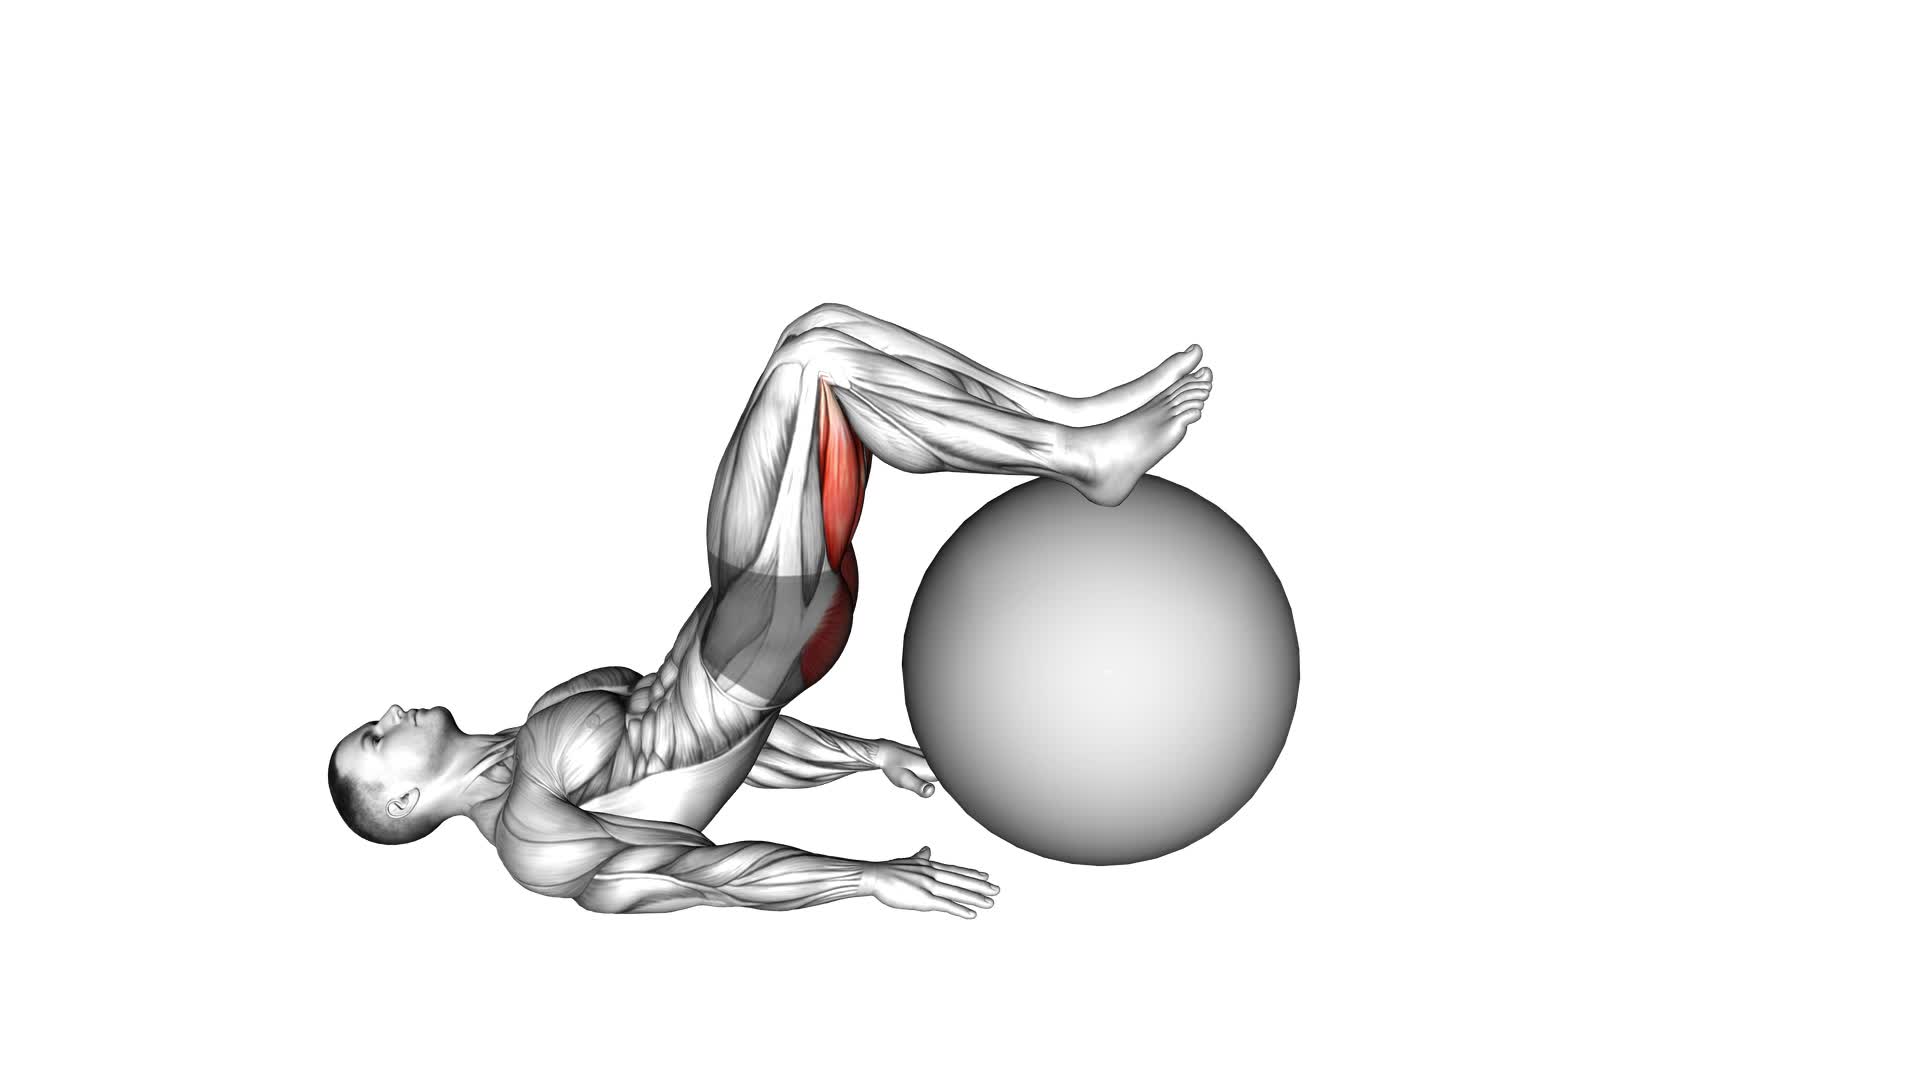 Exercise Ball Leg Curl - Video Exercise Guide & Tips